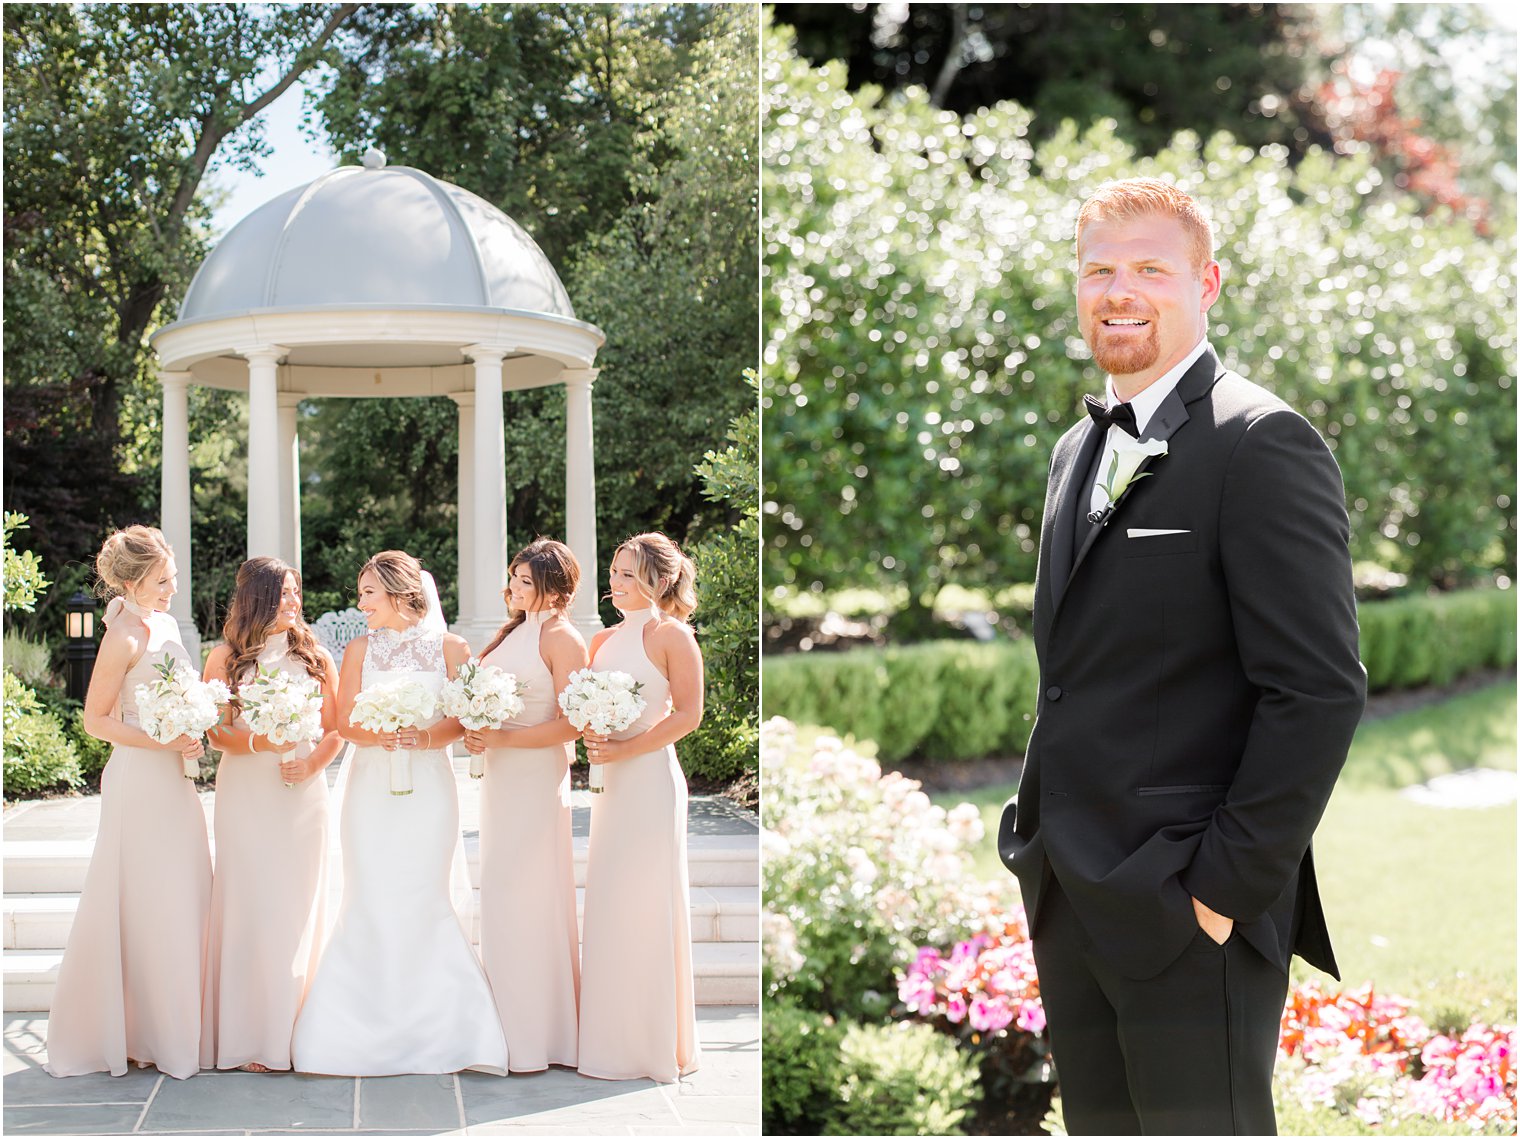 Wedding portraits at Park Chateau Estate and Gardens